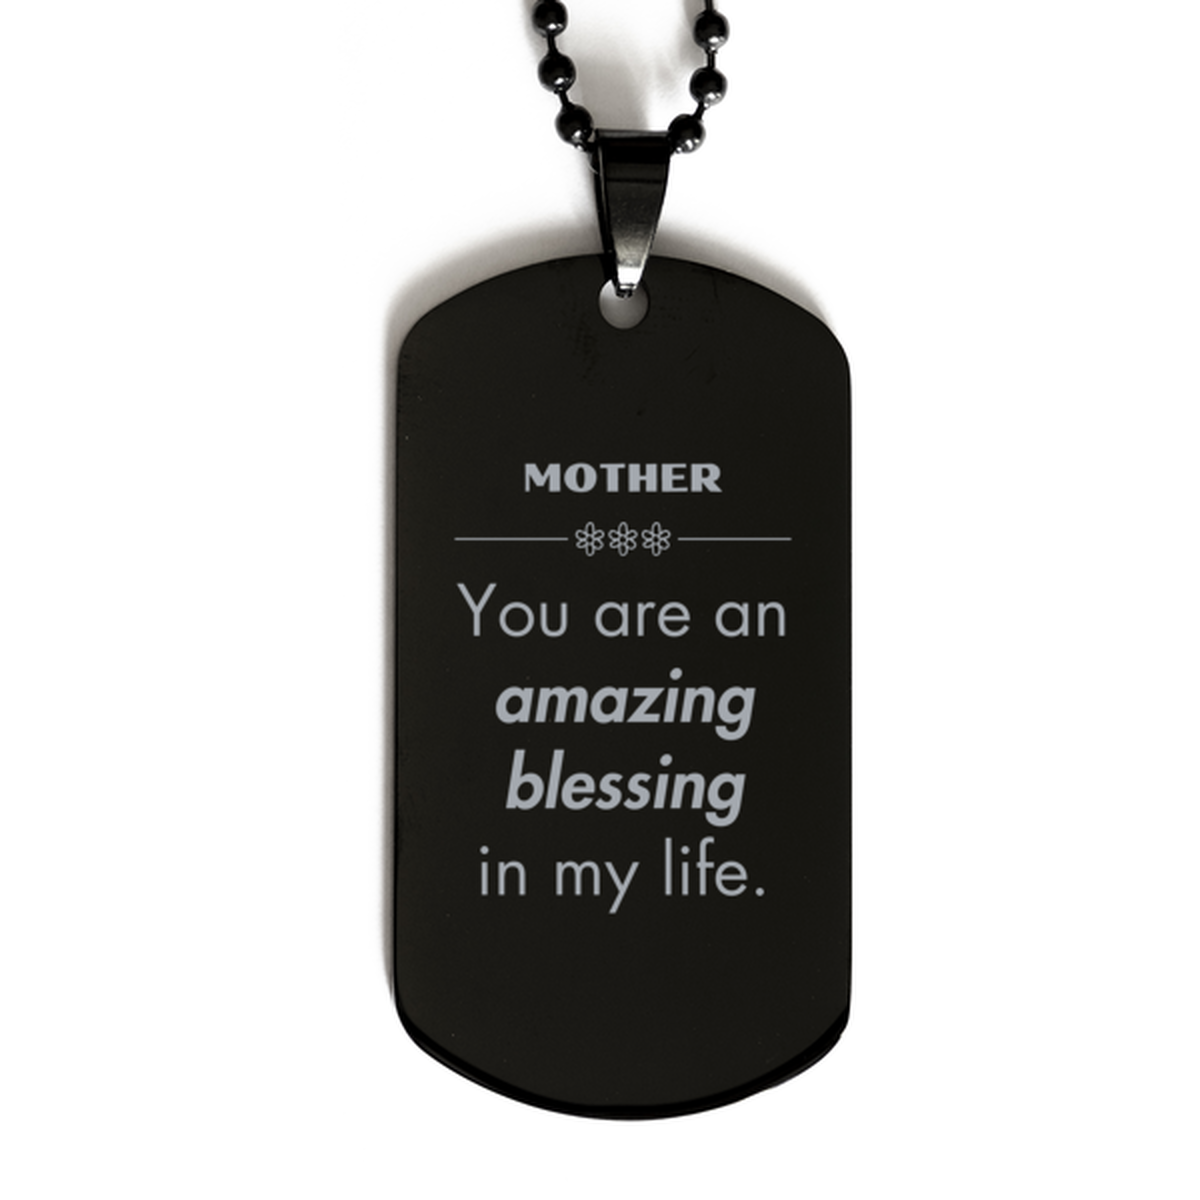 Mother Black Dog Tag, You are an amazing blessing in my life, Thank You Gifts For Mother, Inspirational Birthday Christmas Unique Gifts For Mother